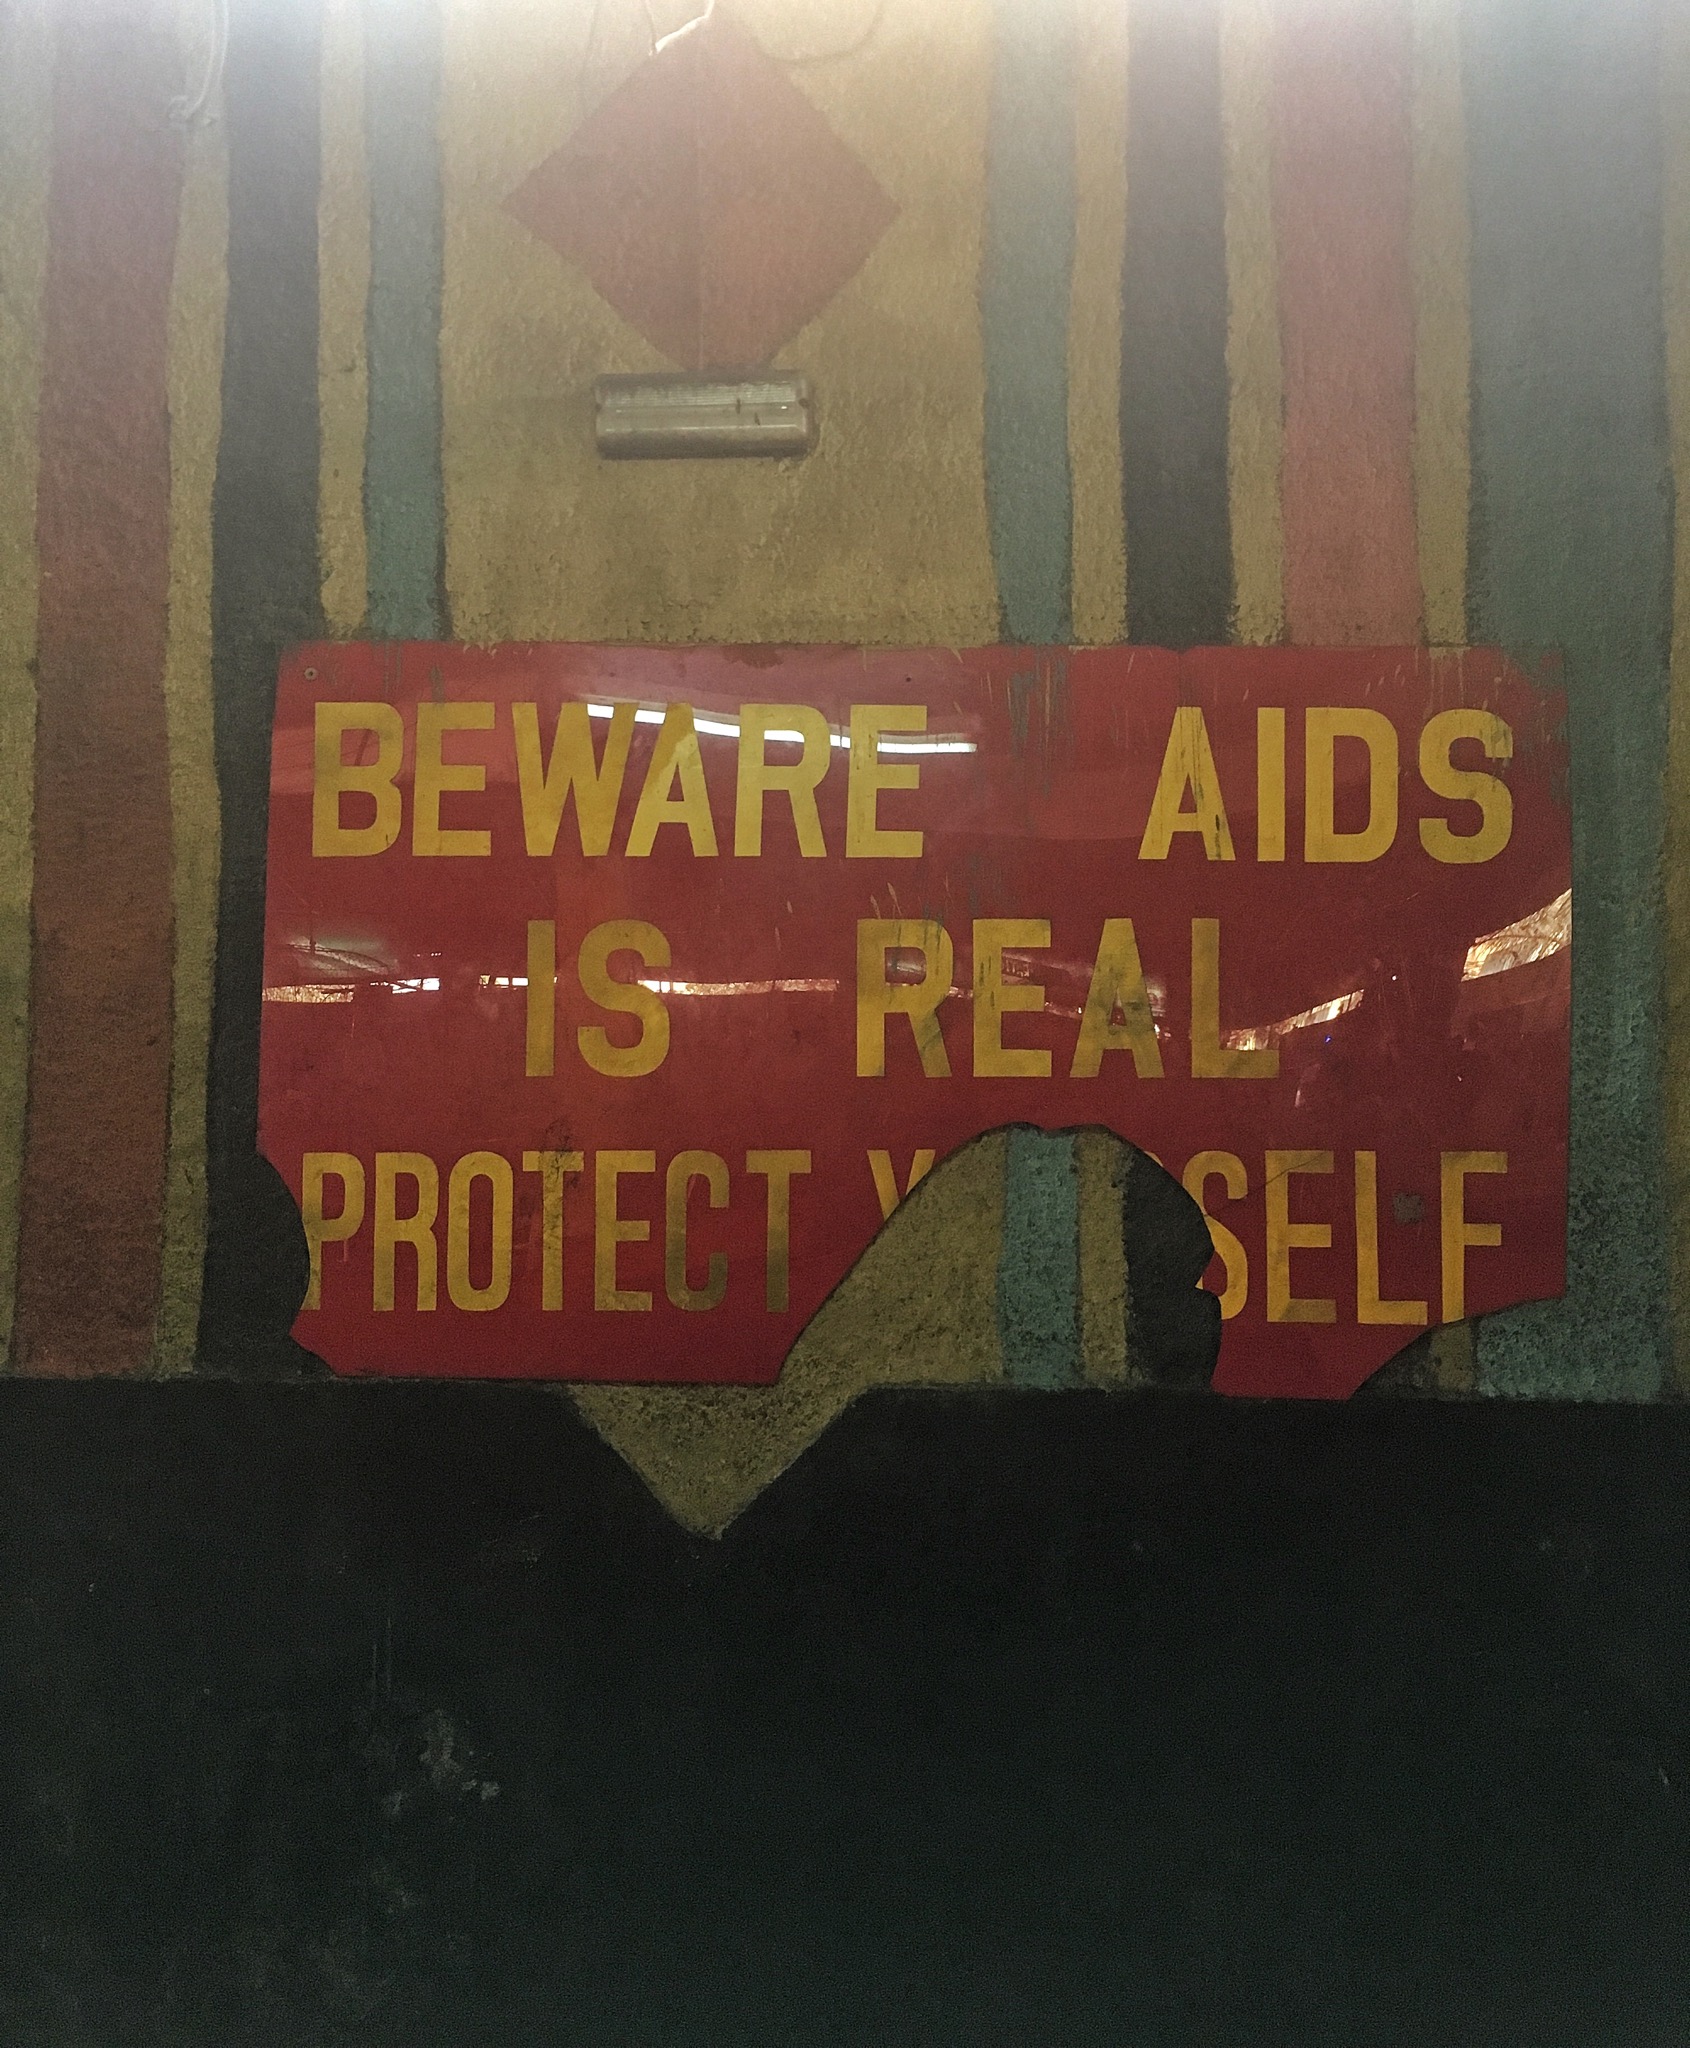 AIDS is real poster at Fela's Shrine in Ikeja, Lagos